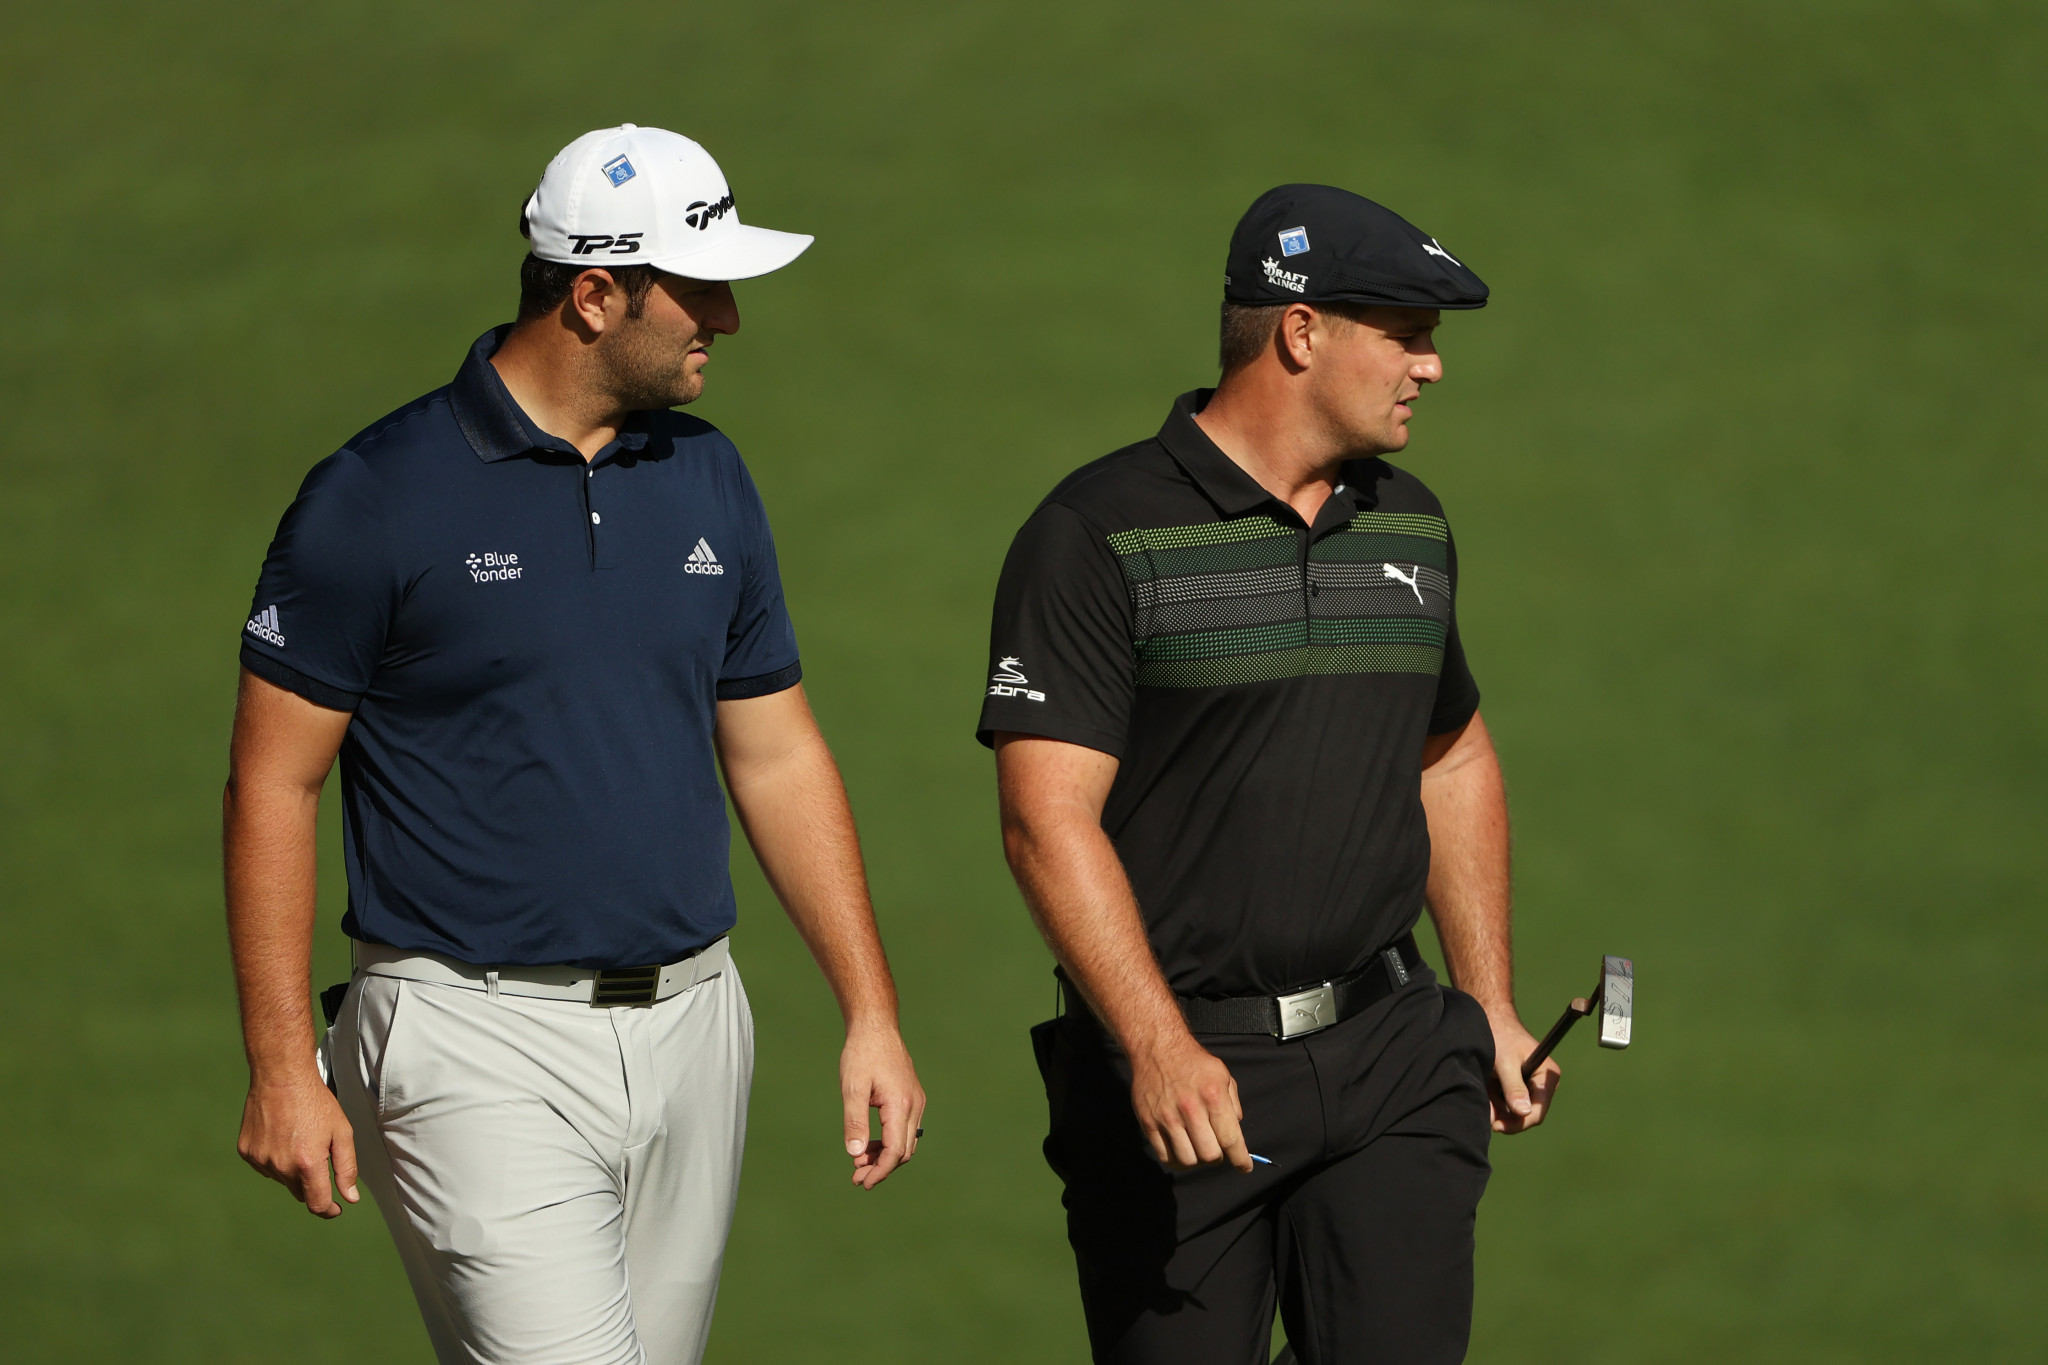 Jon Rahm, left, and Bryson DeChambeau are out of the golf event at Tokyo 2020 after testing positive for COVID-19 ©Getty Images